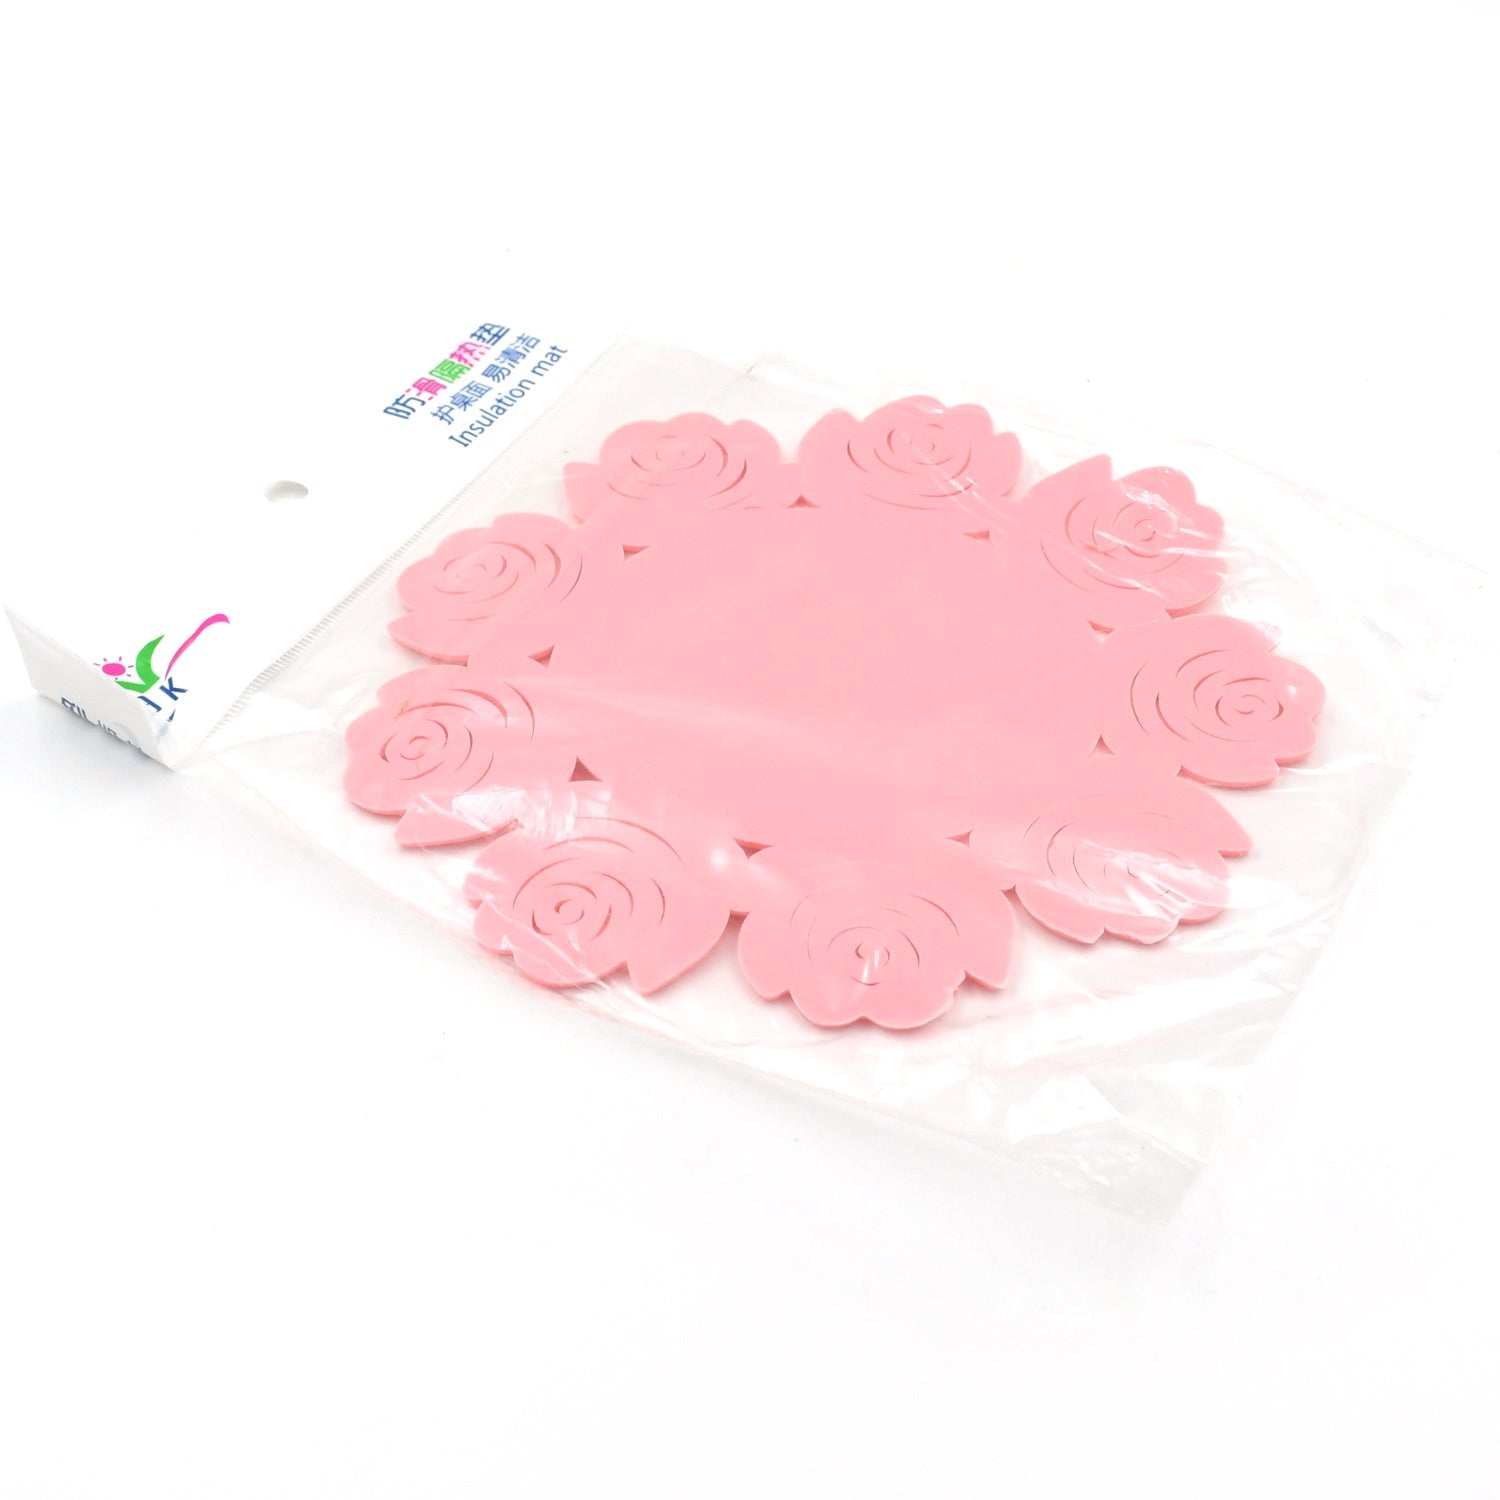 Rose Coasters: Kitchen & Dining Protection - Pack of 6